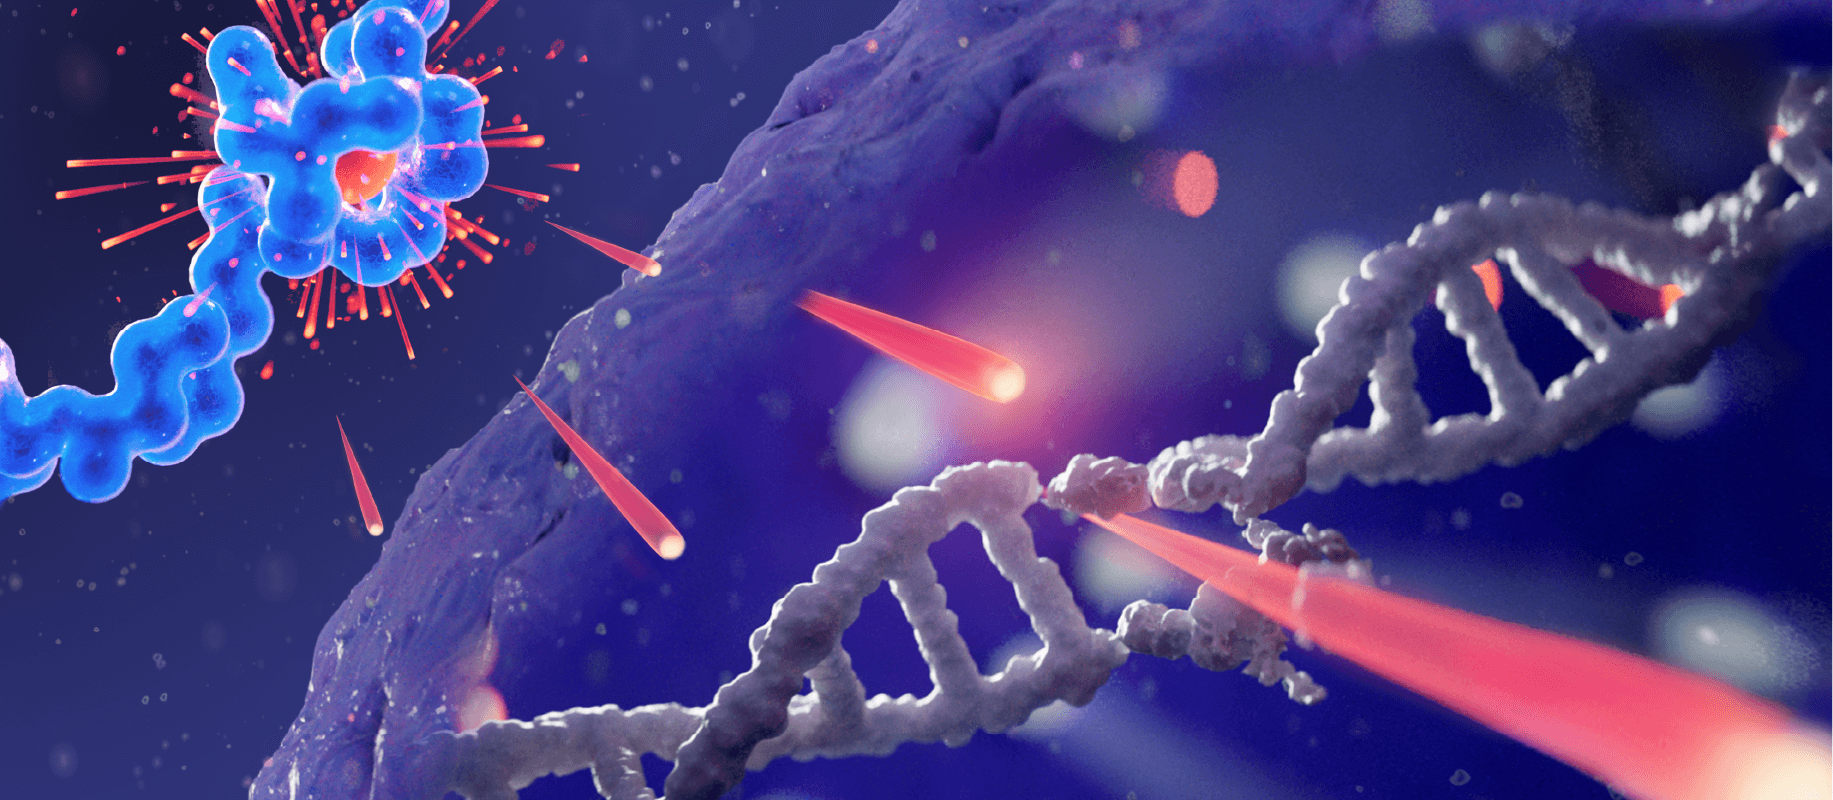 Image to highlight how Lutetium-177 emits DNA-damaging radiation within the cell causing single- and double-stranded DNA breaks in targeted cells as well as surrounding cells.